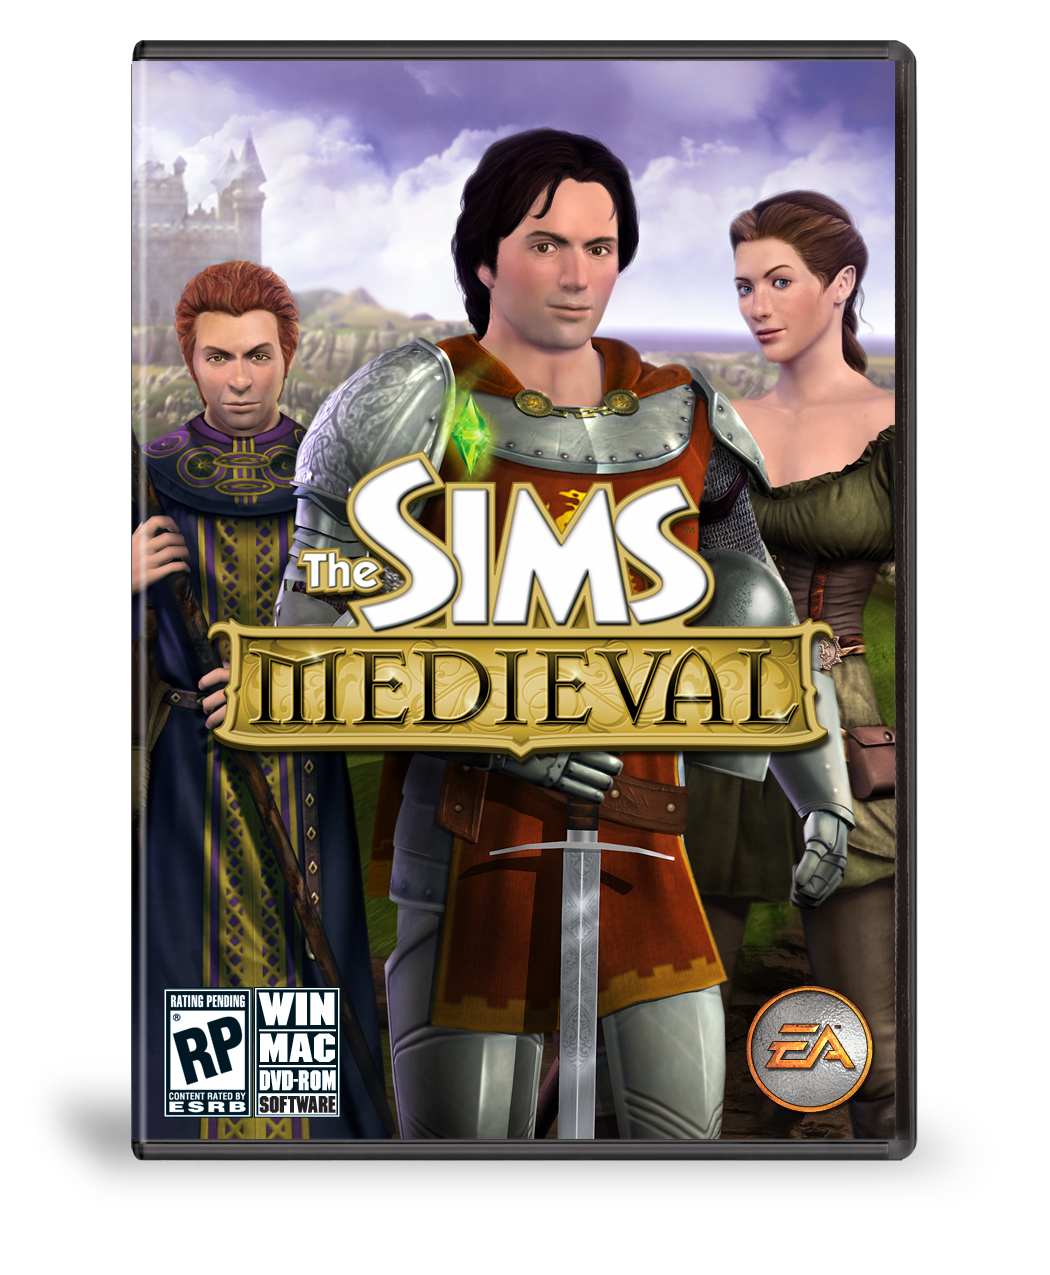 the sims medieval cheats wiki